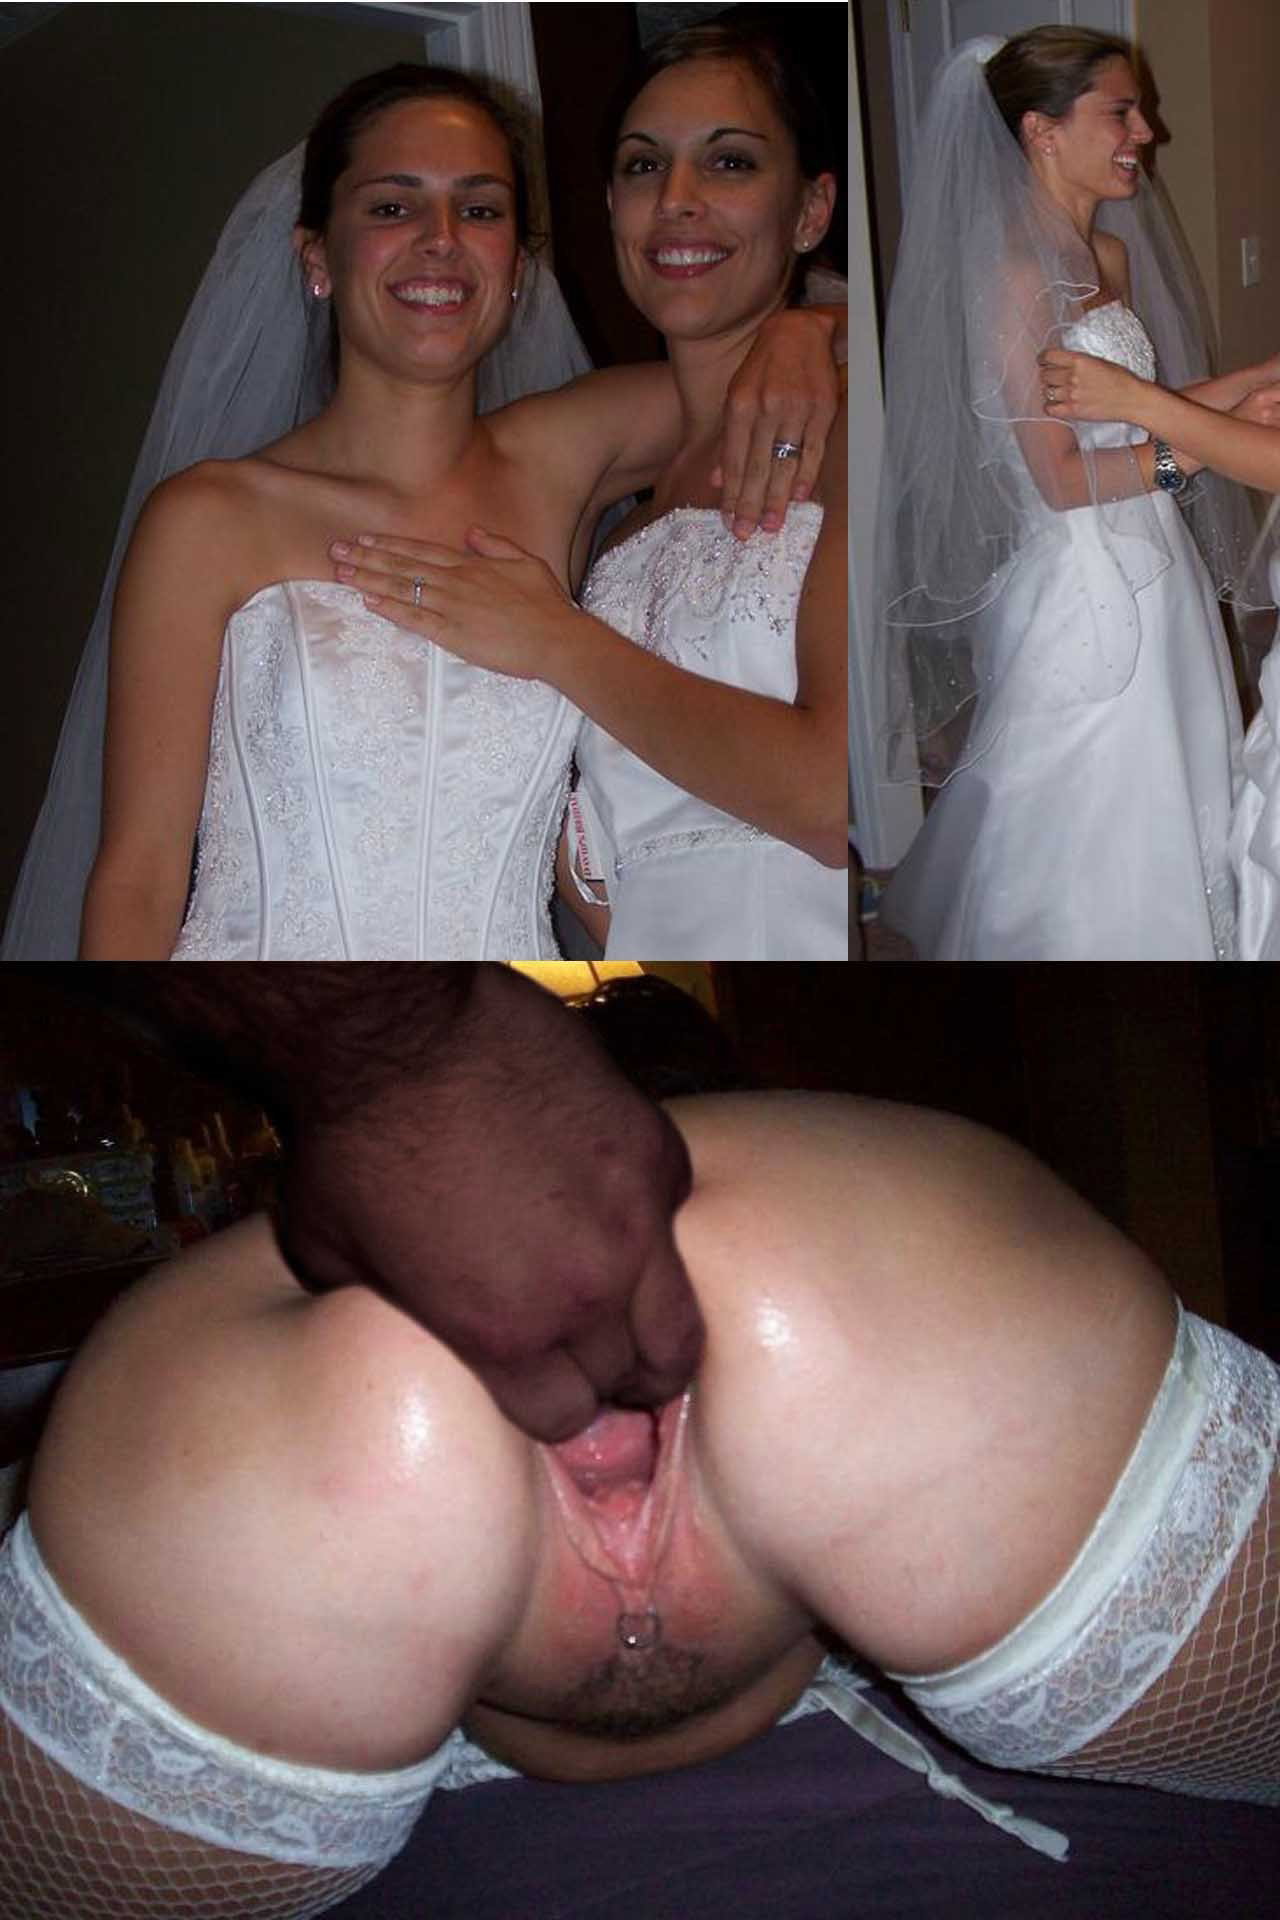 Photo by ChurchWhores with the username @ChurchWhores,  June 12, 2019 at 6:21 PM. The post is about the topic Wedding and Bride